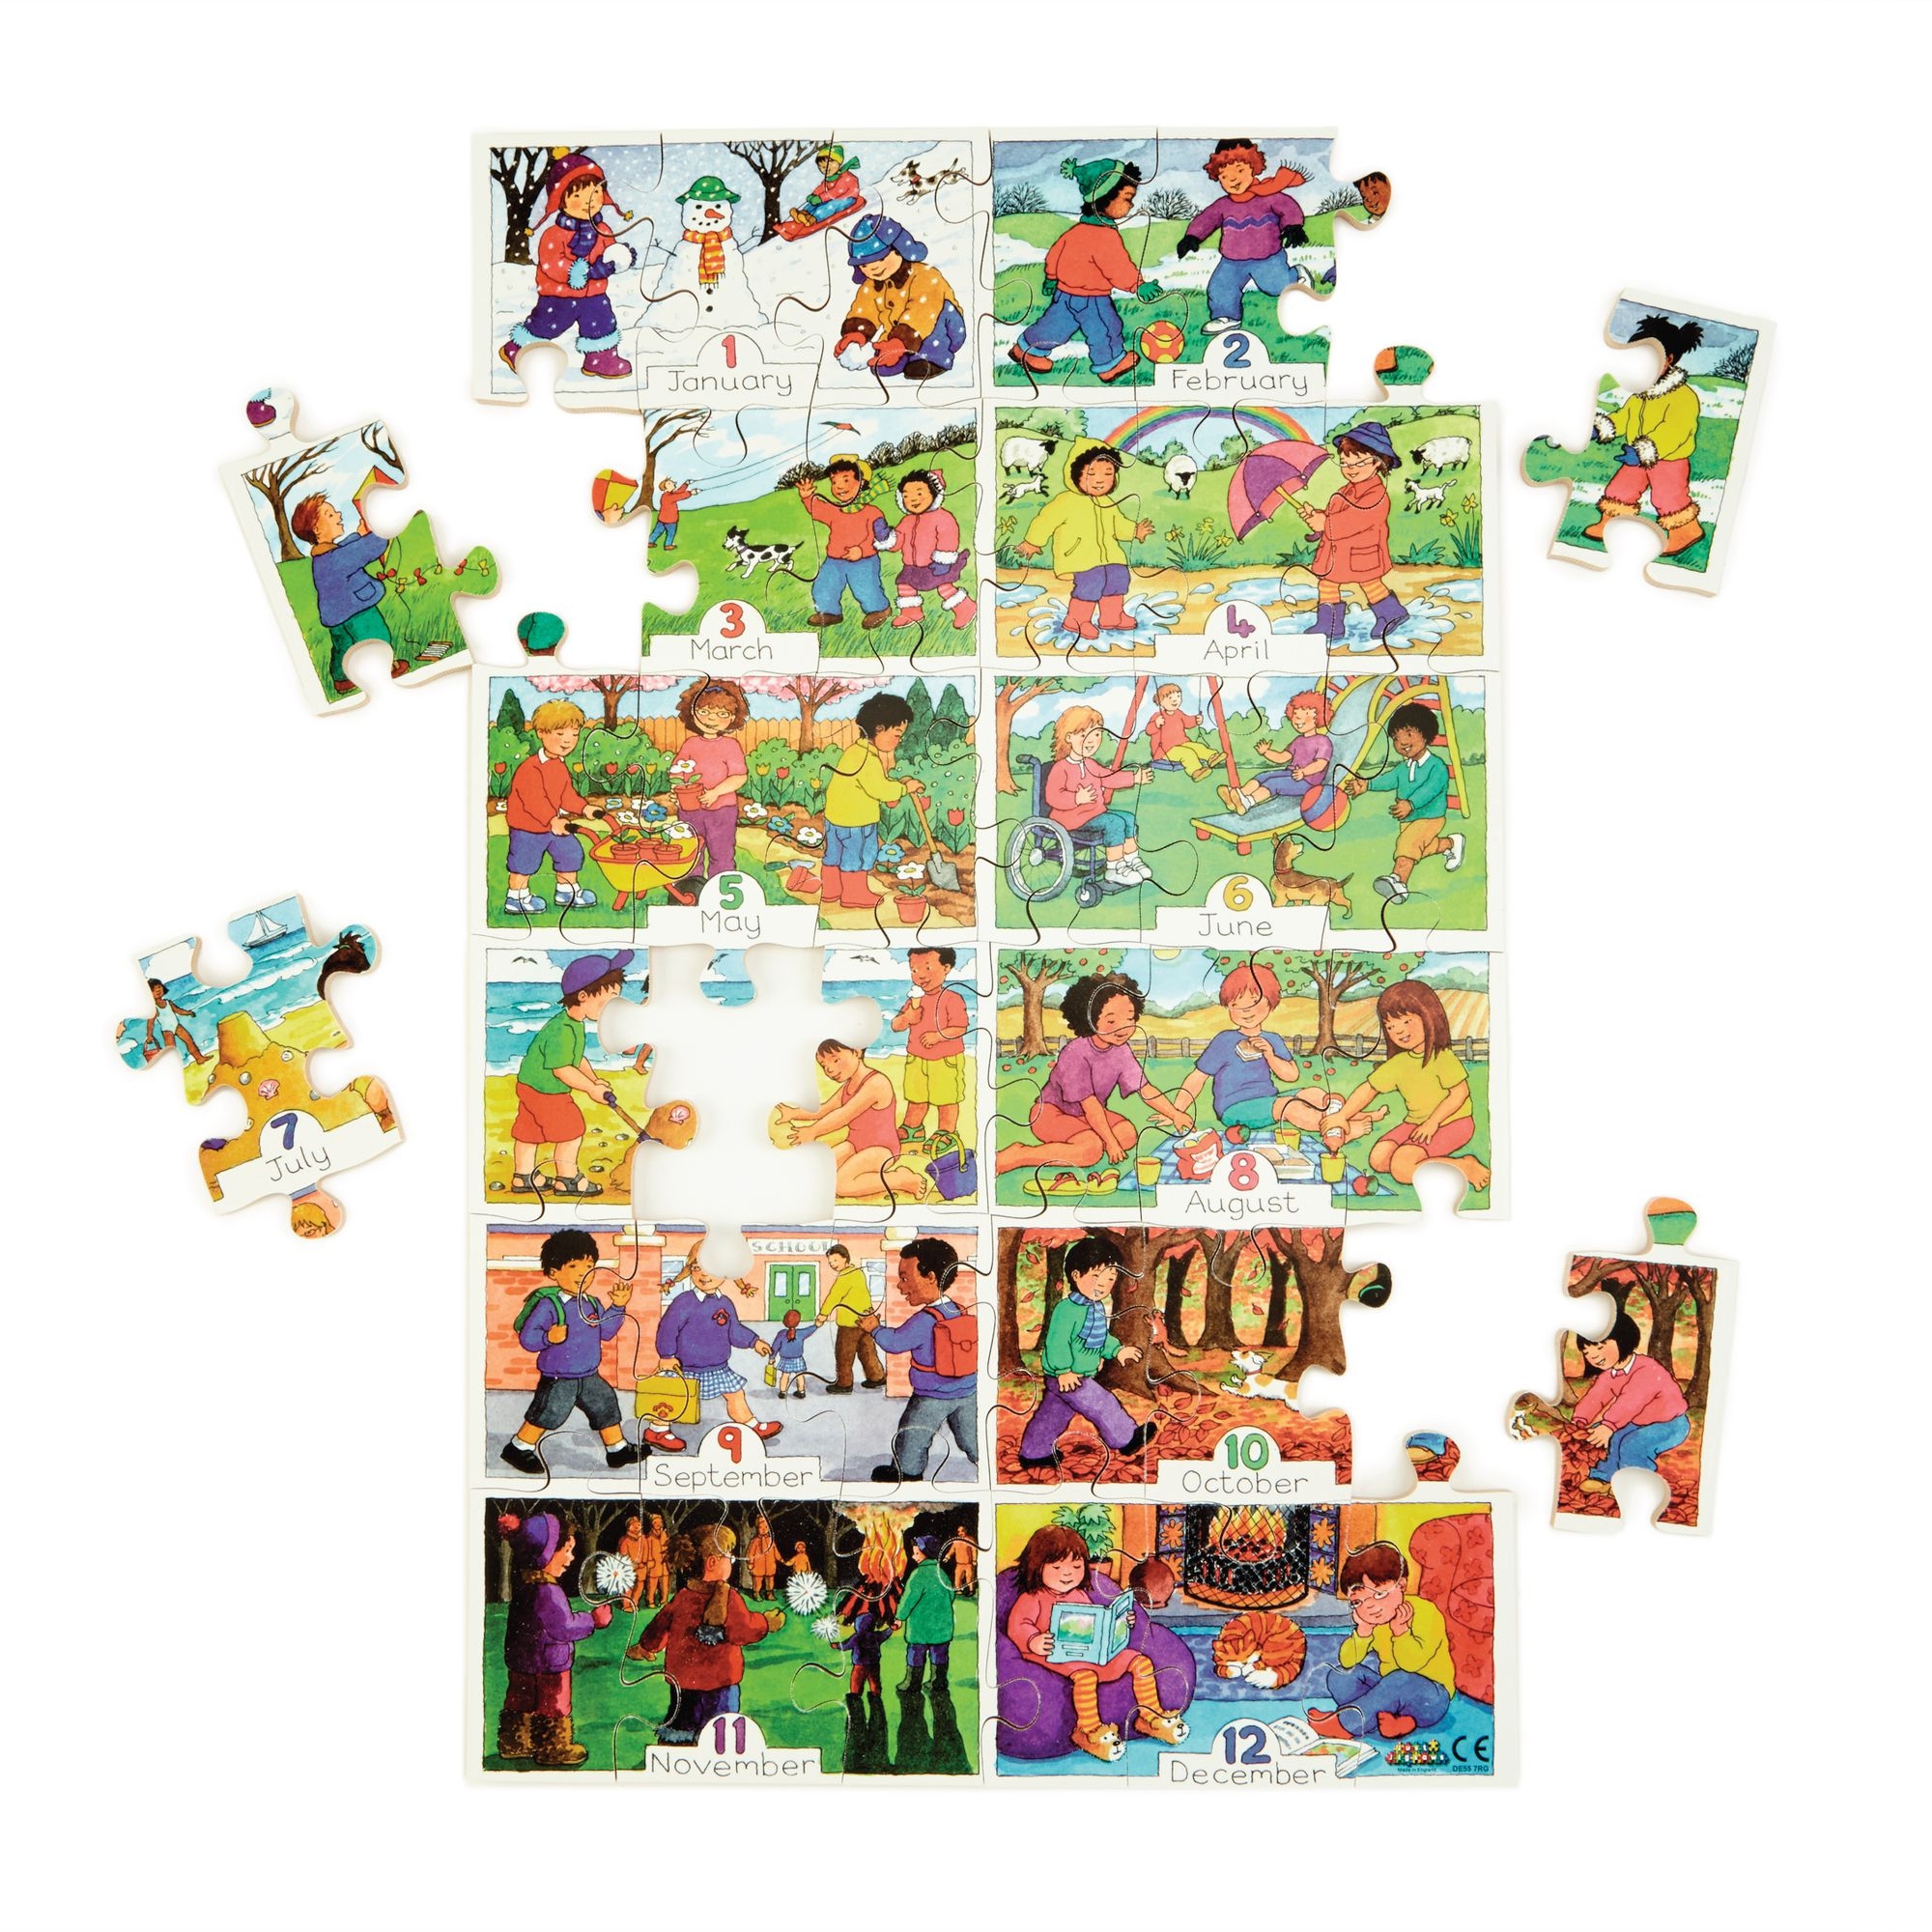 Months of the Year Jigsaw